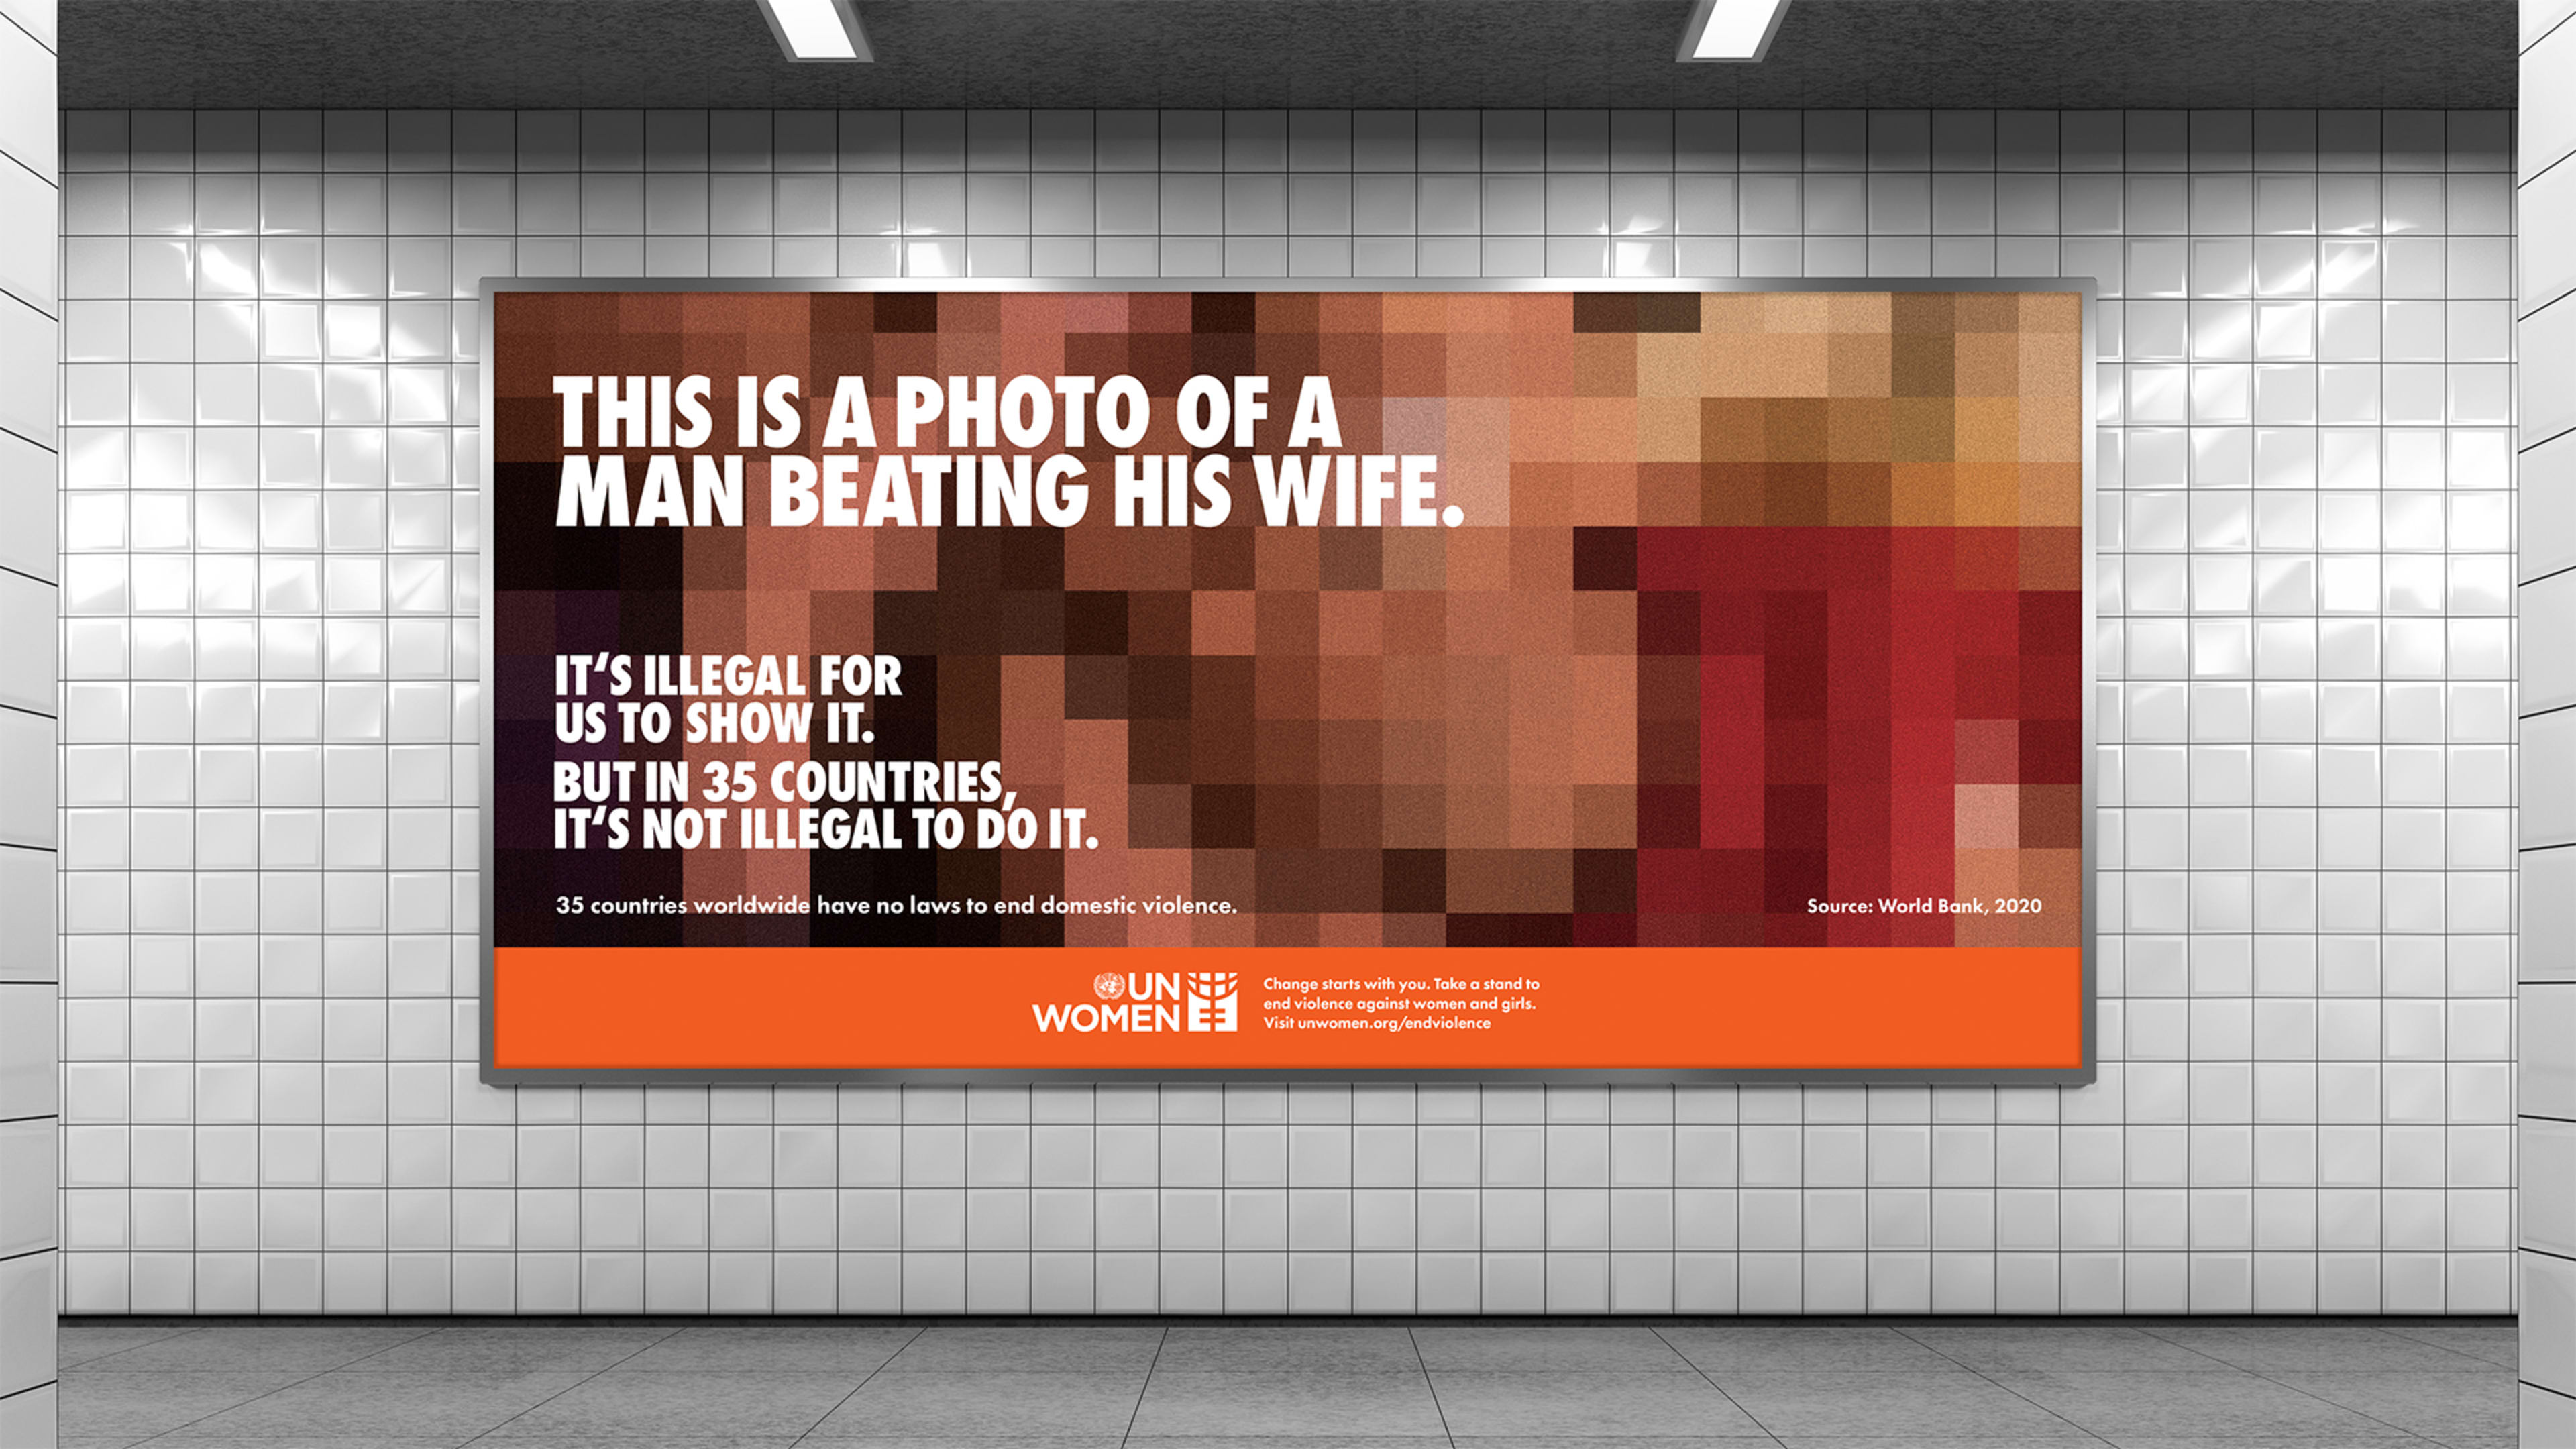 Why UN Women is promoting a photo of a man beating his wife